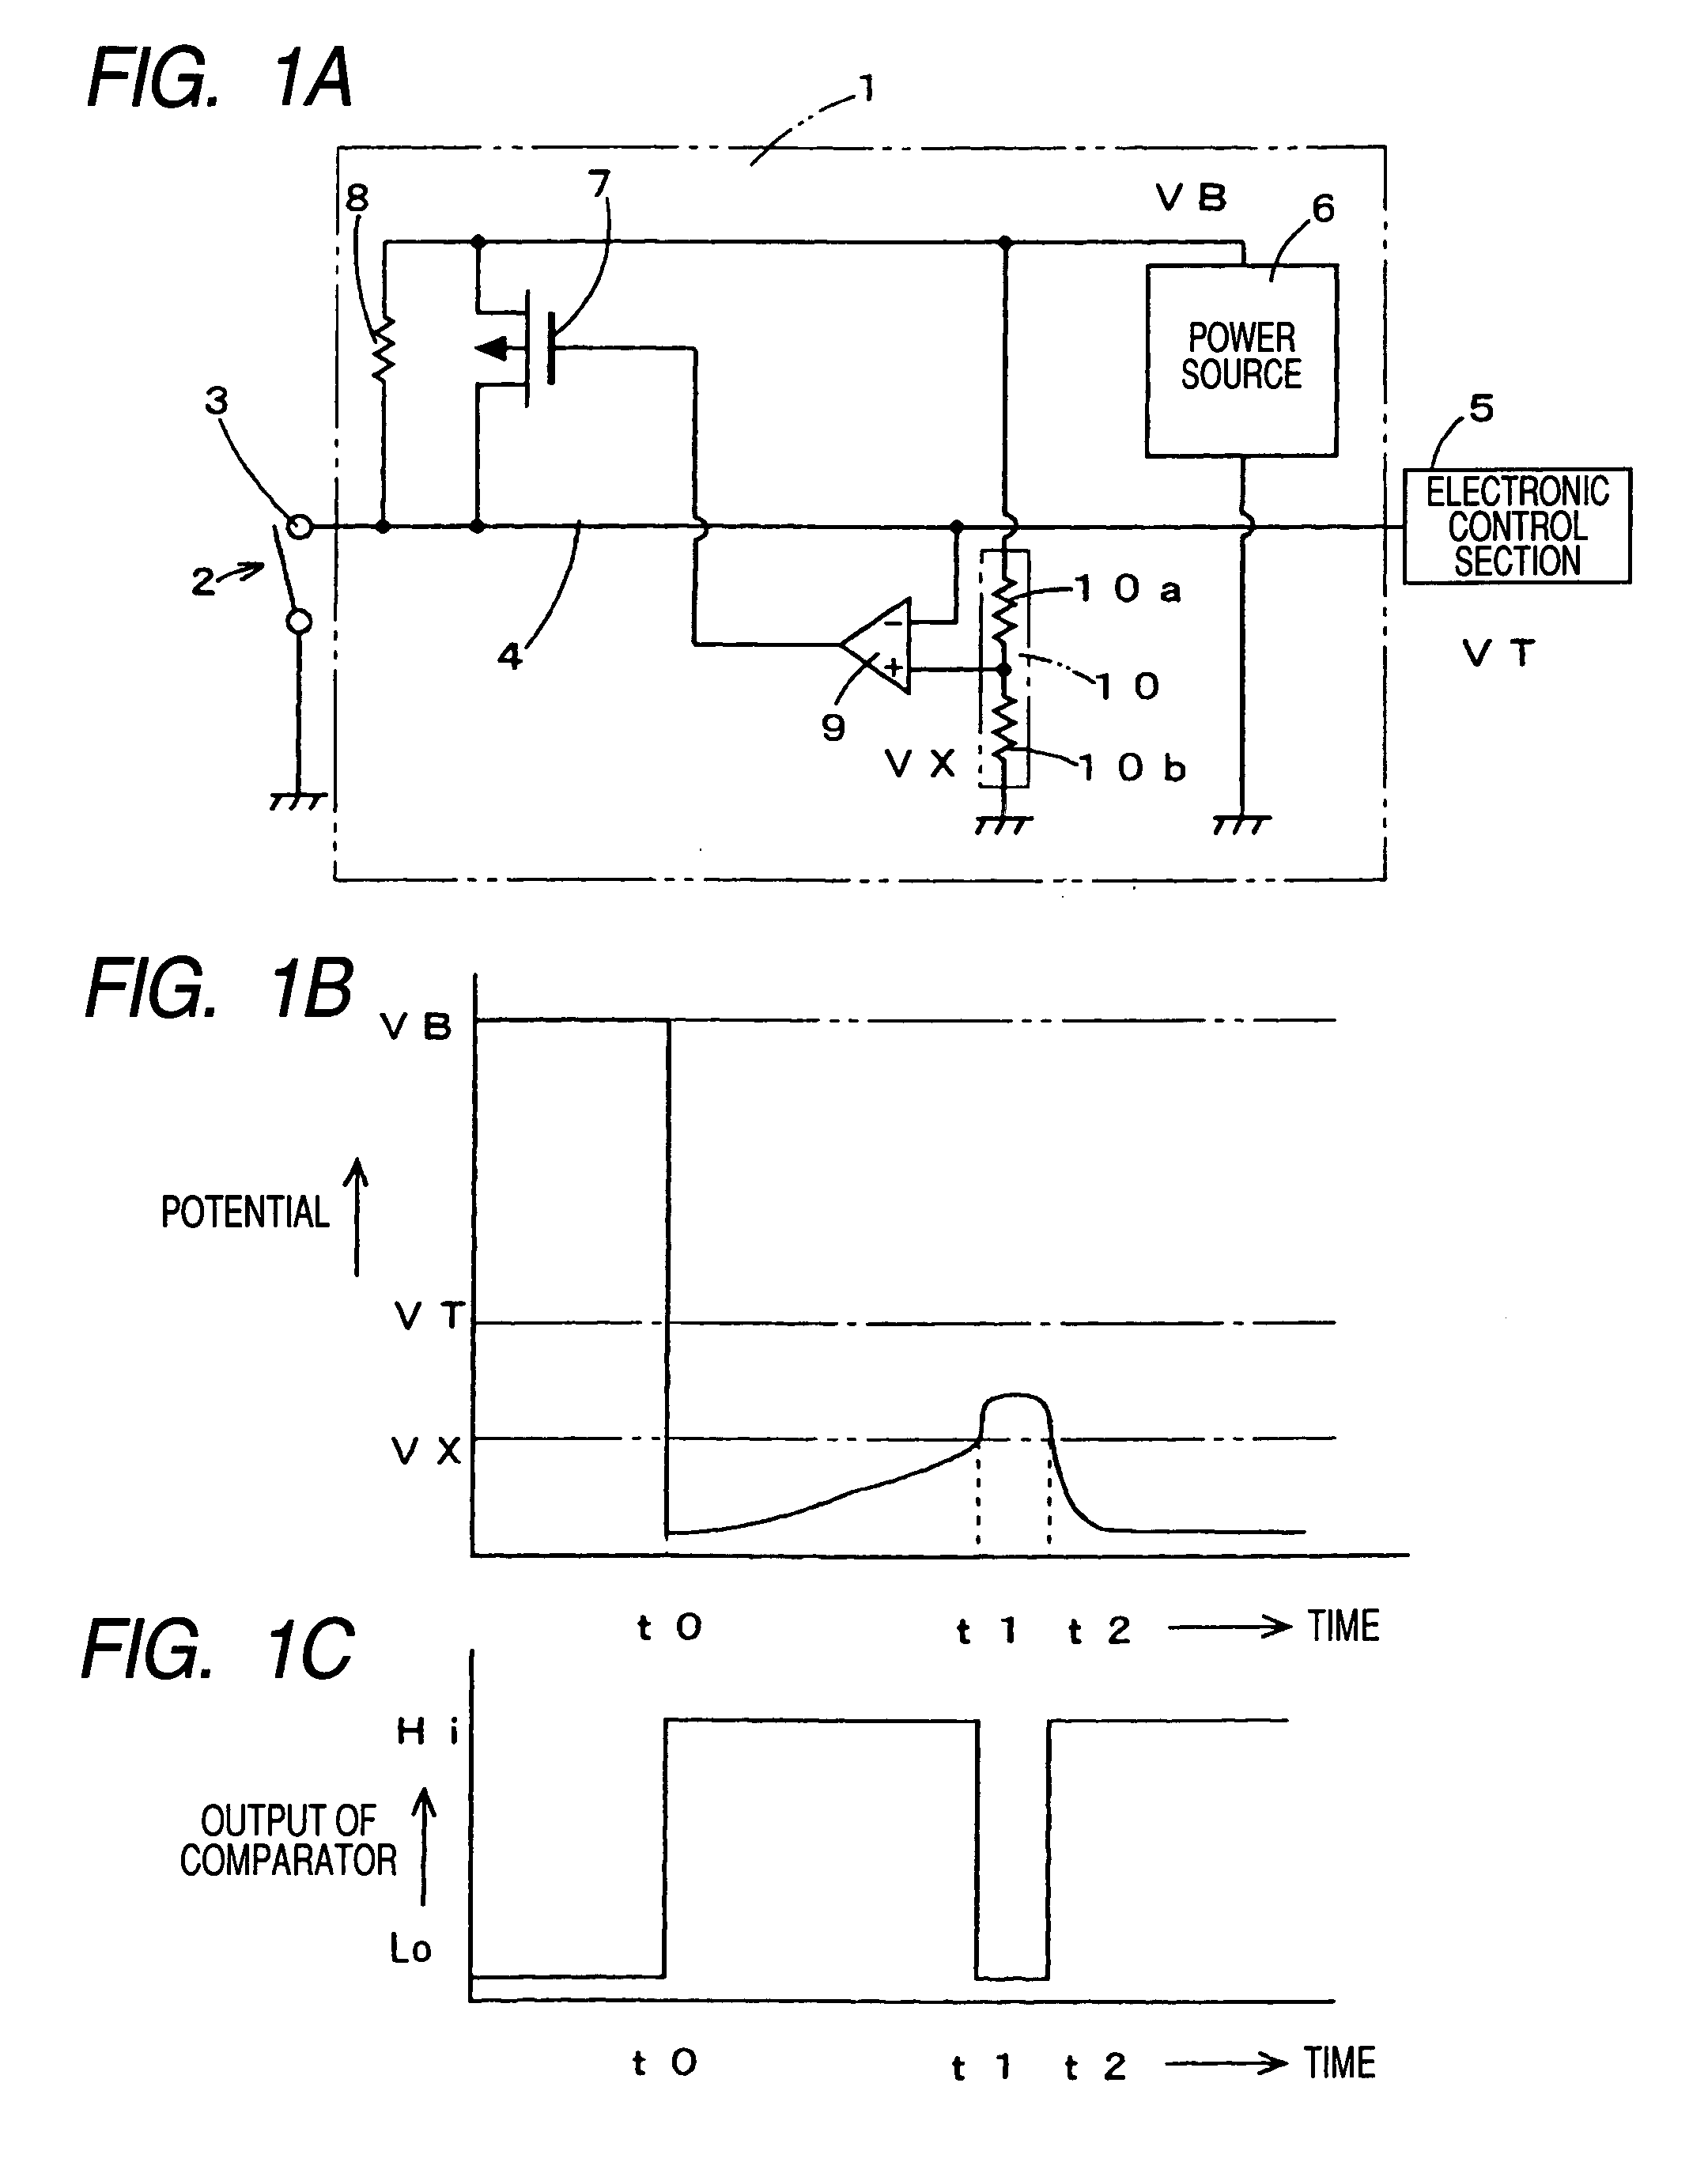 Method and apparatus for preventing corrosion of contact